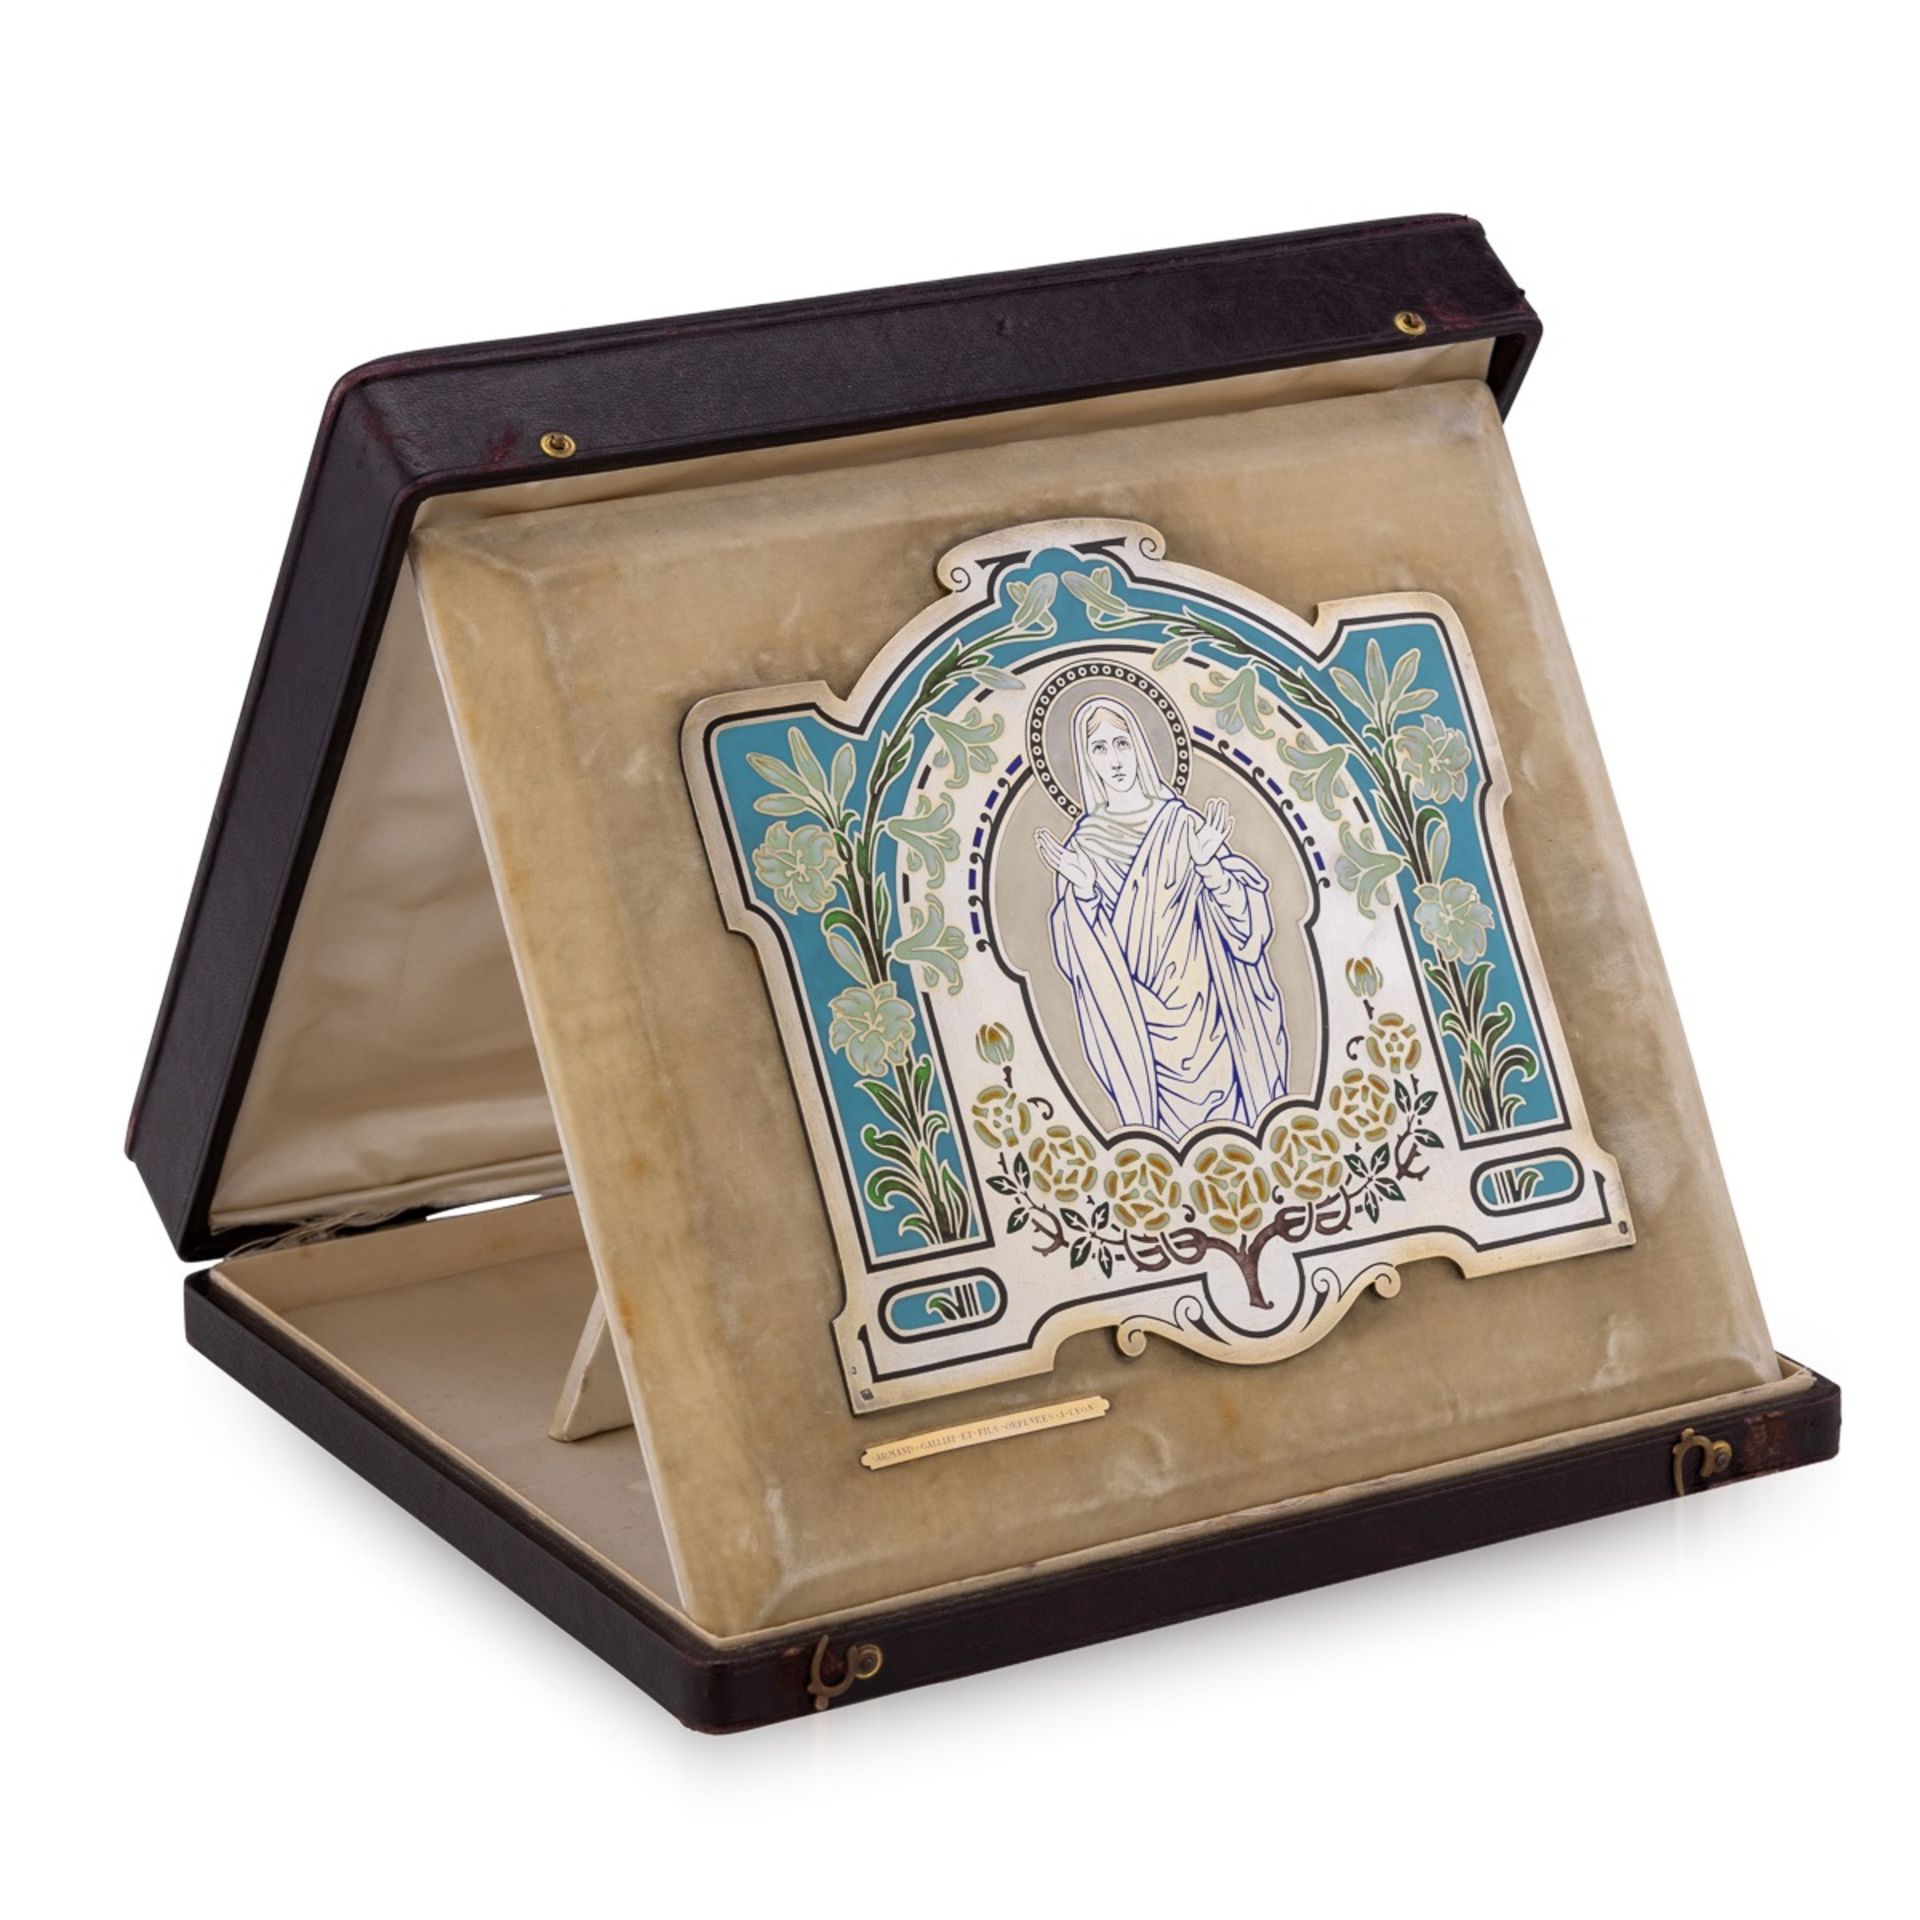 A 19TH CENTURY FRENCH SILVER AND ENAMEL RELIGIOUS ICON